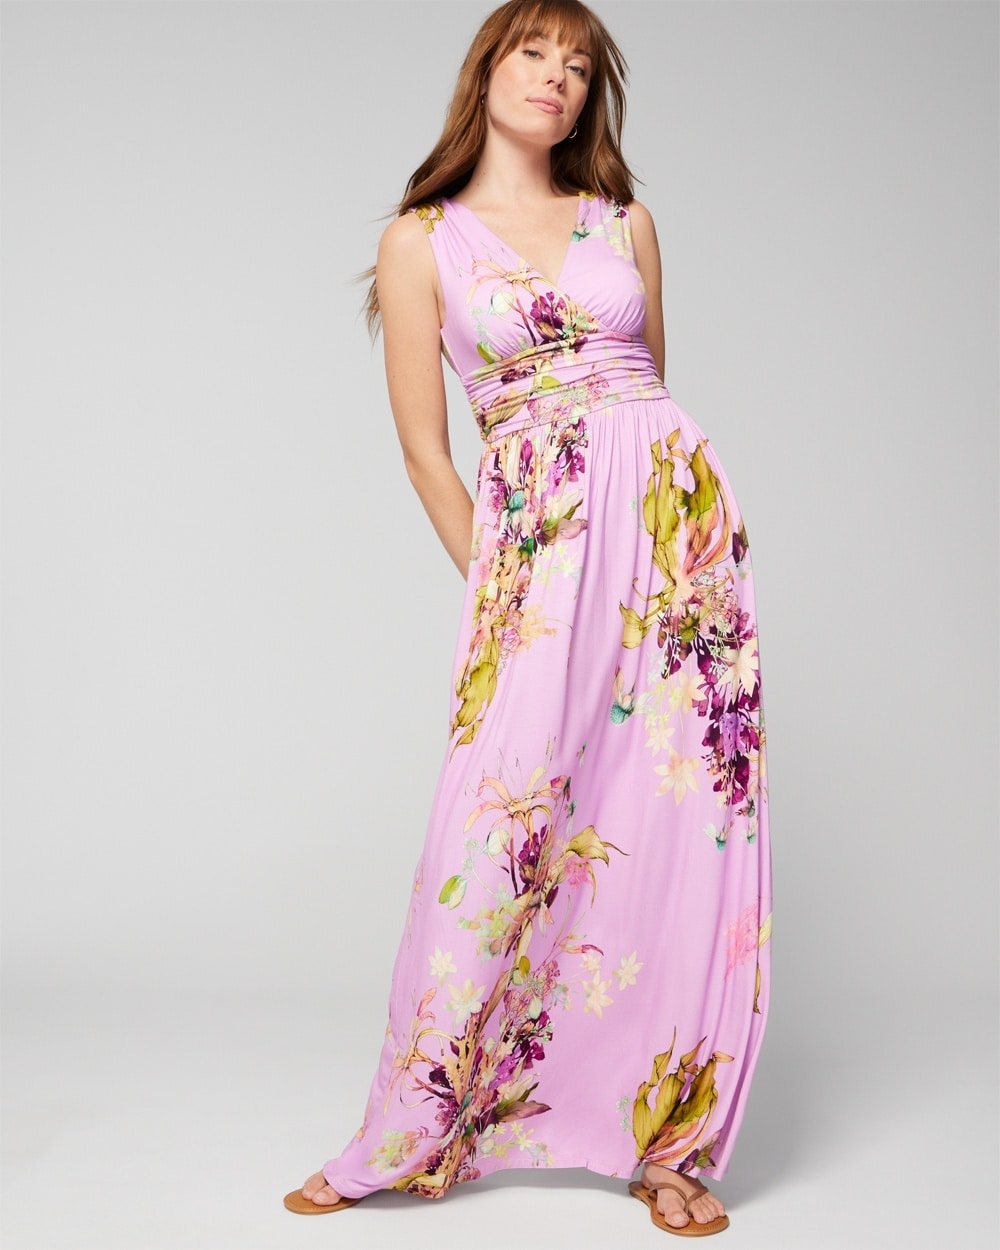 Soma Women's Soft Jersey Maxi Sundress With Built-in Bra In Pink Floral Size Small |  In Botanica Bouquet G Meta